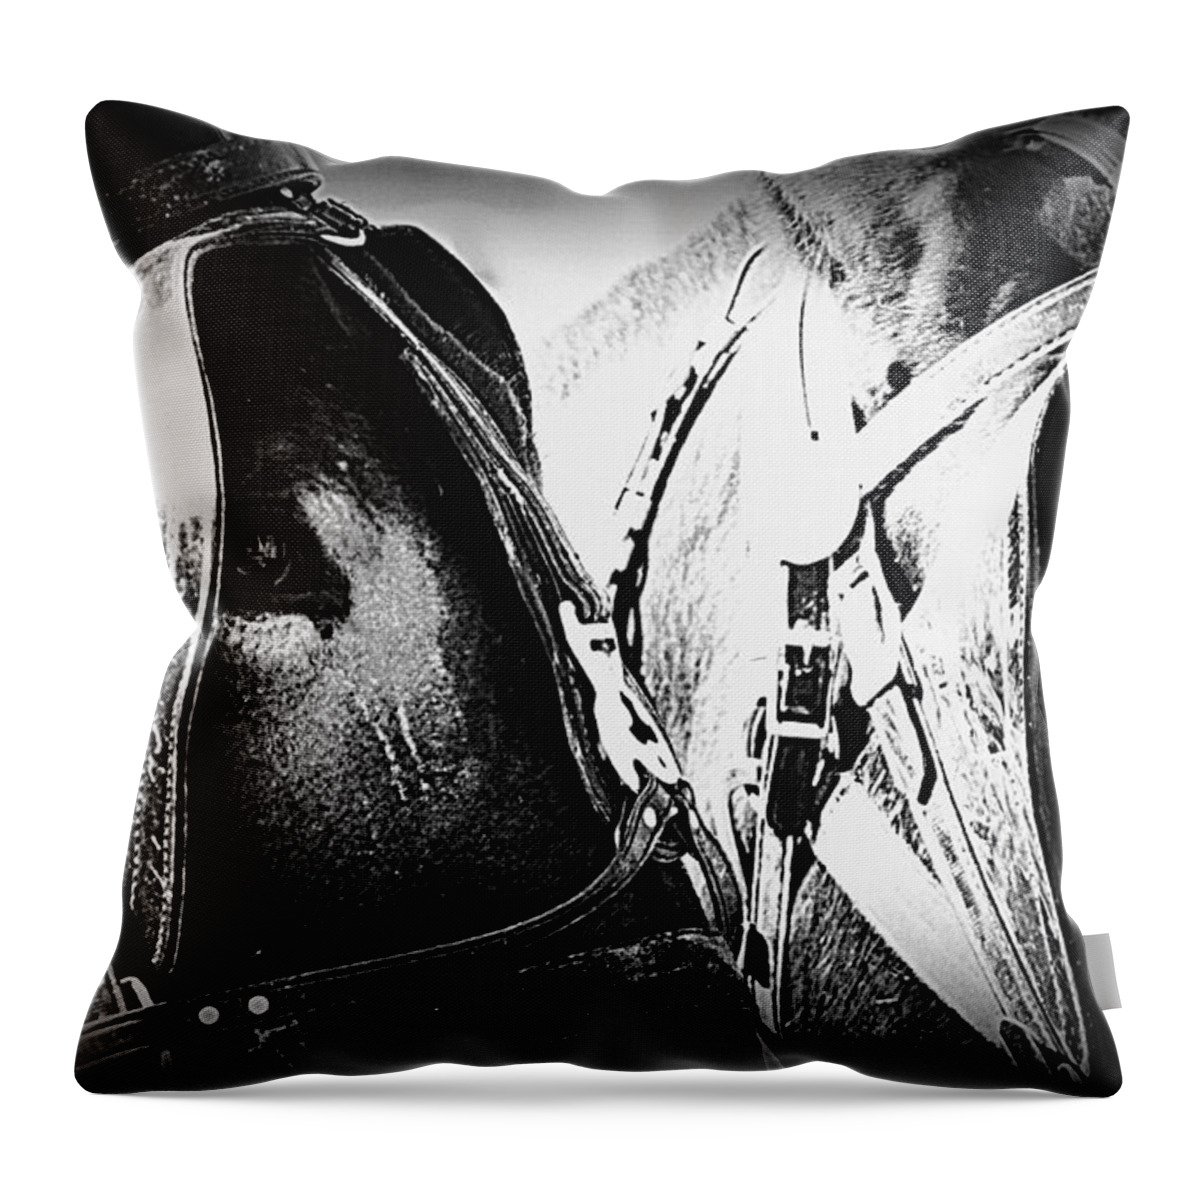 Mules Throw Pillow featuring the photograph Team Work - Mules 2225-012-BW by Travis Truelove